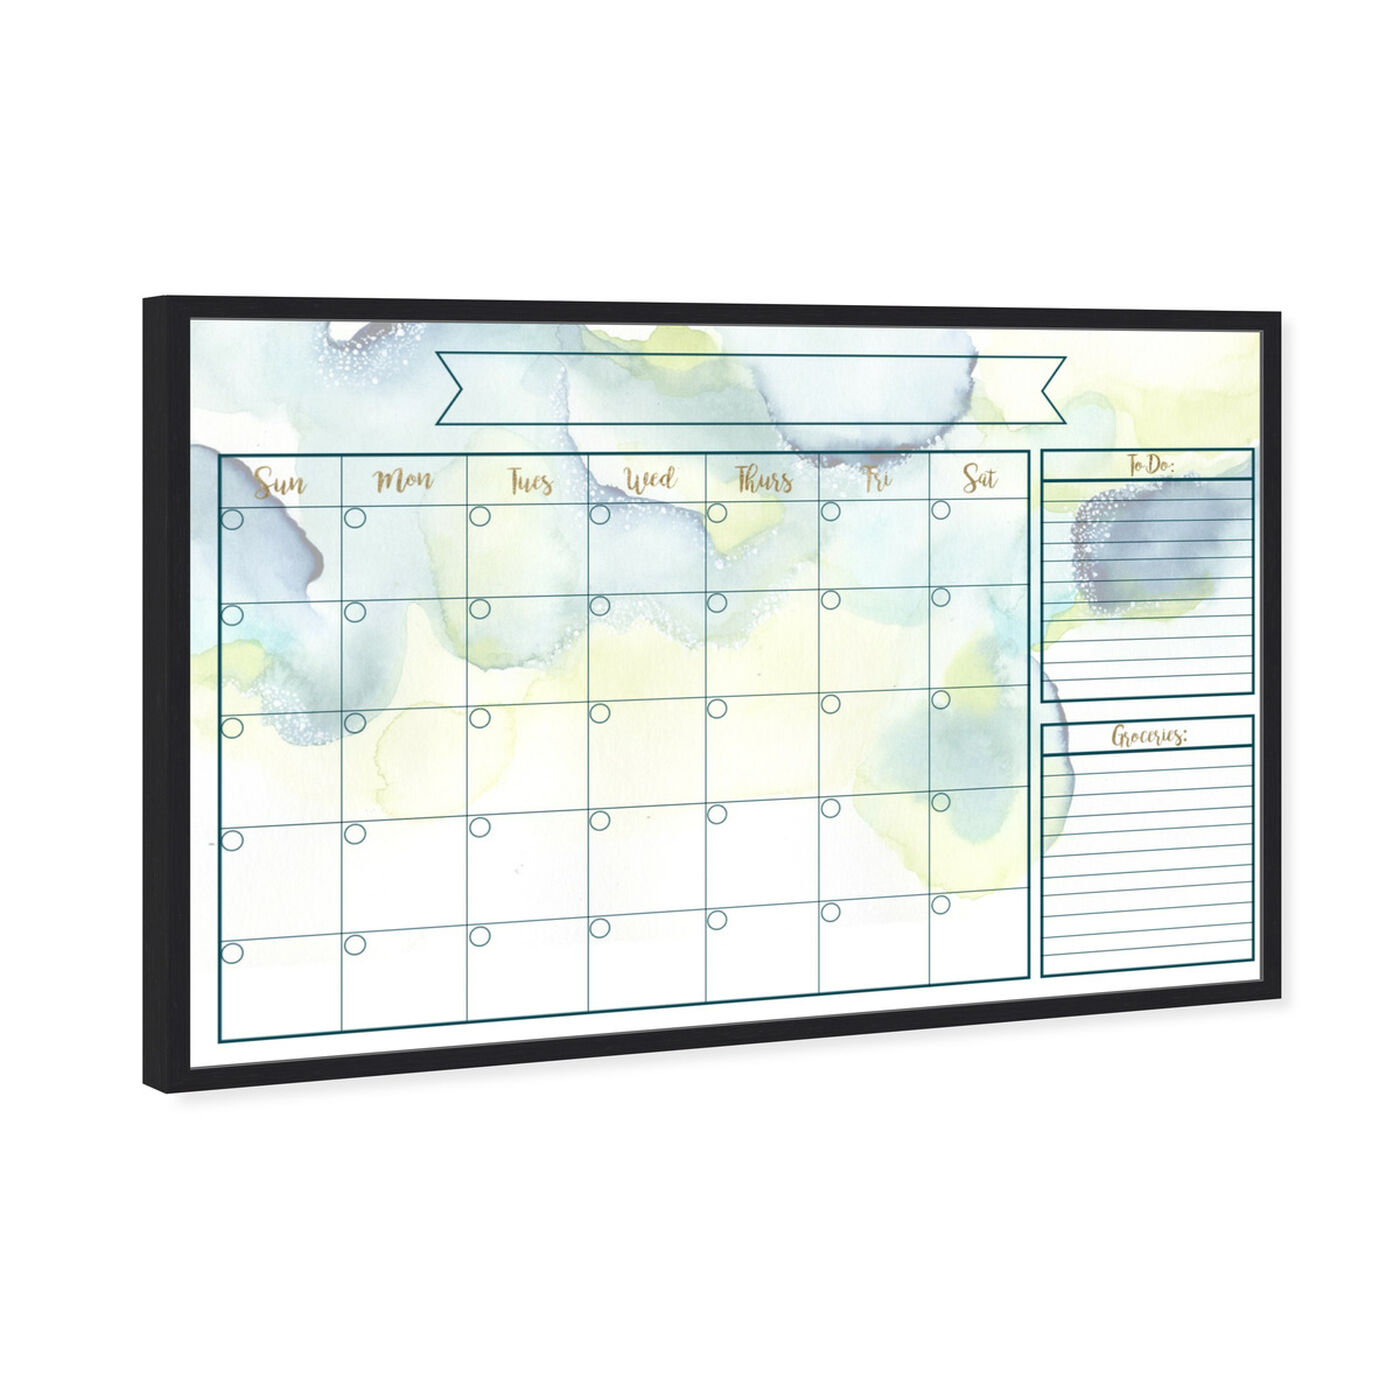 Angled view of Watercolor Calendar featuring education and office and whiteboards art.